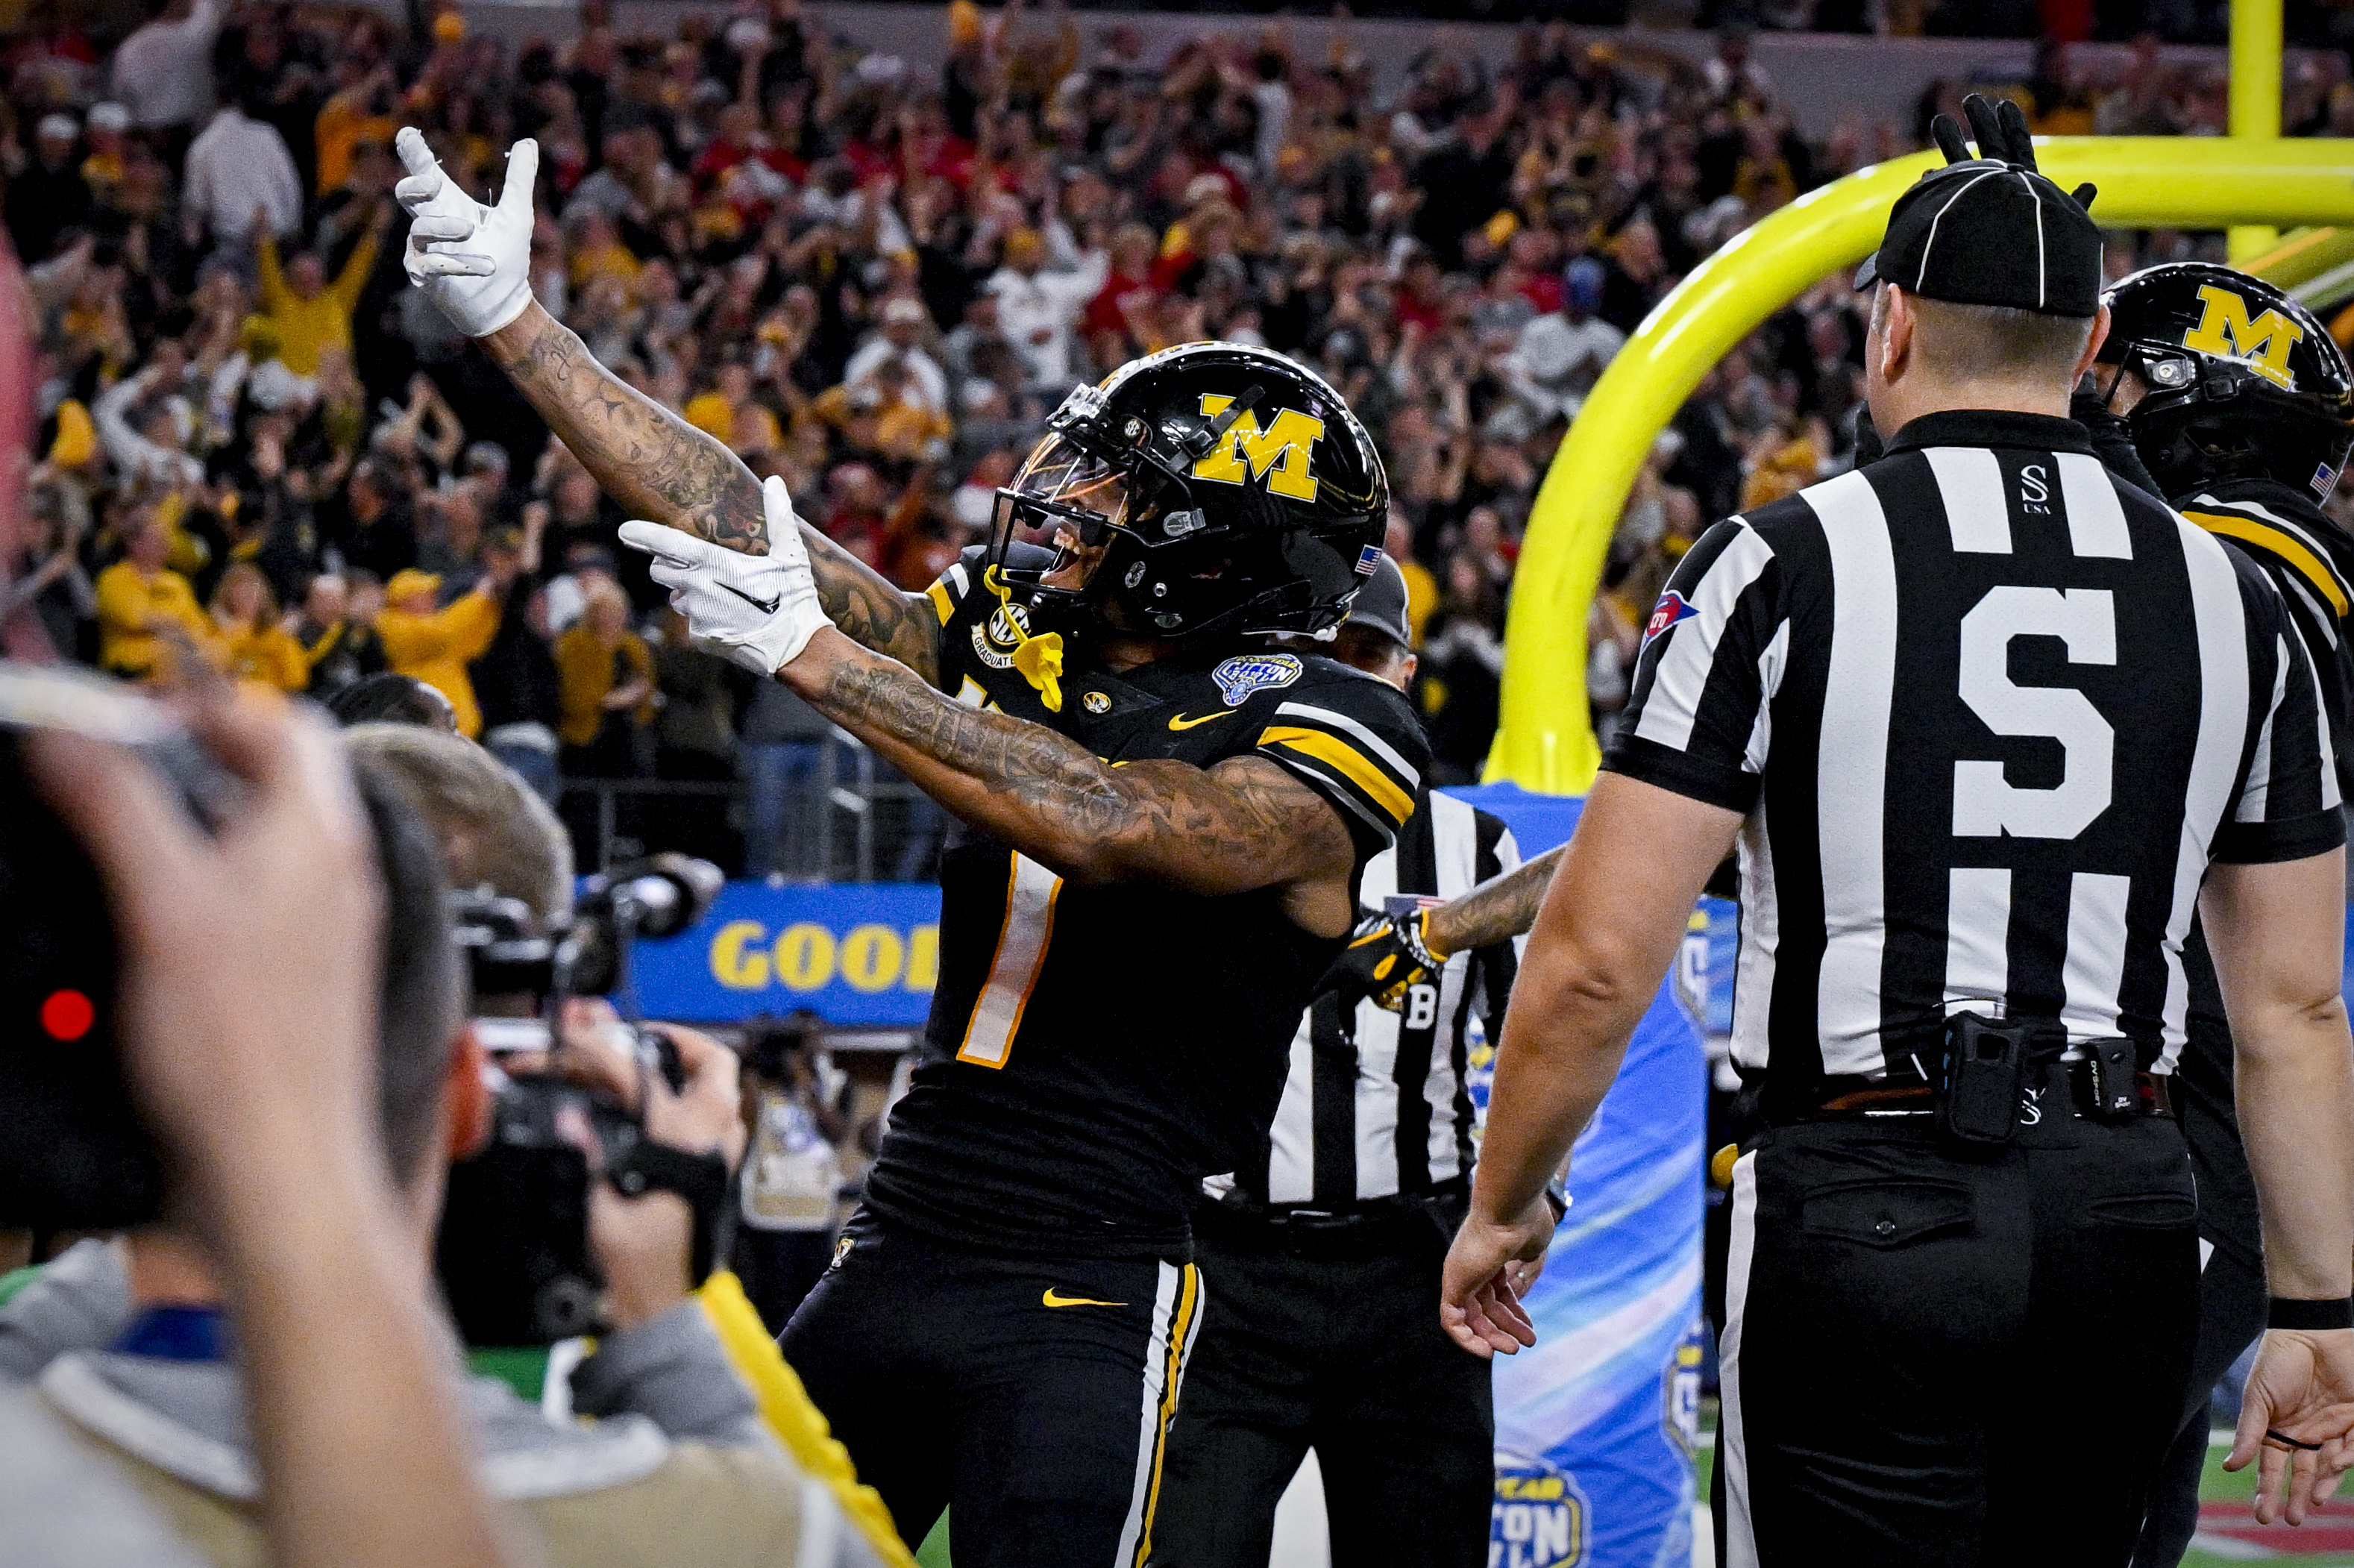 Missouri Tigers wide receiver Theo Wease Jr. (1) celebrates after wide receiver Luther Burden III (3) catches a pass for a touchdown against the Ohio State Buckeyes during the fourth quarter at AT&T Stadium.